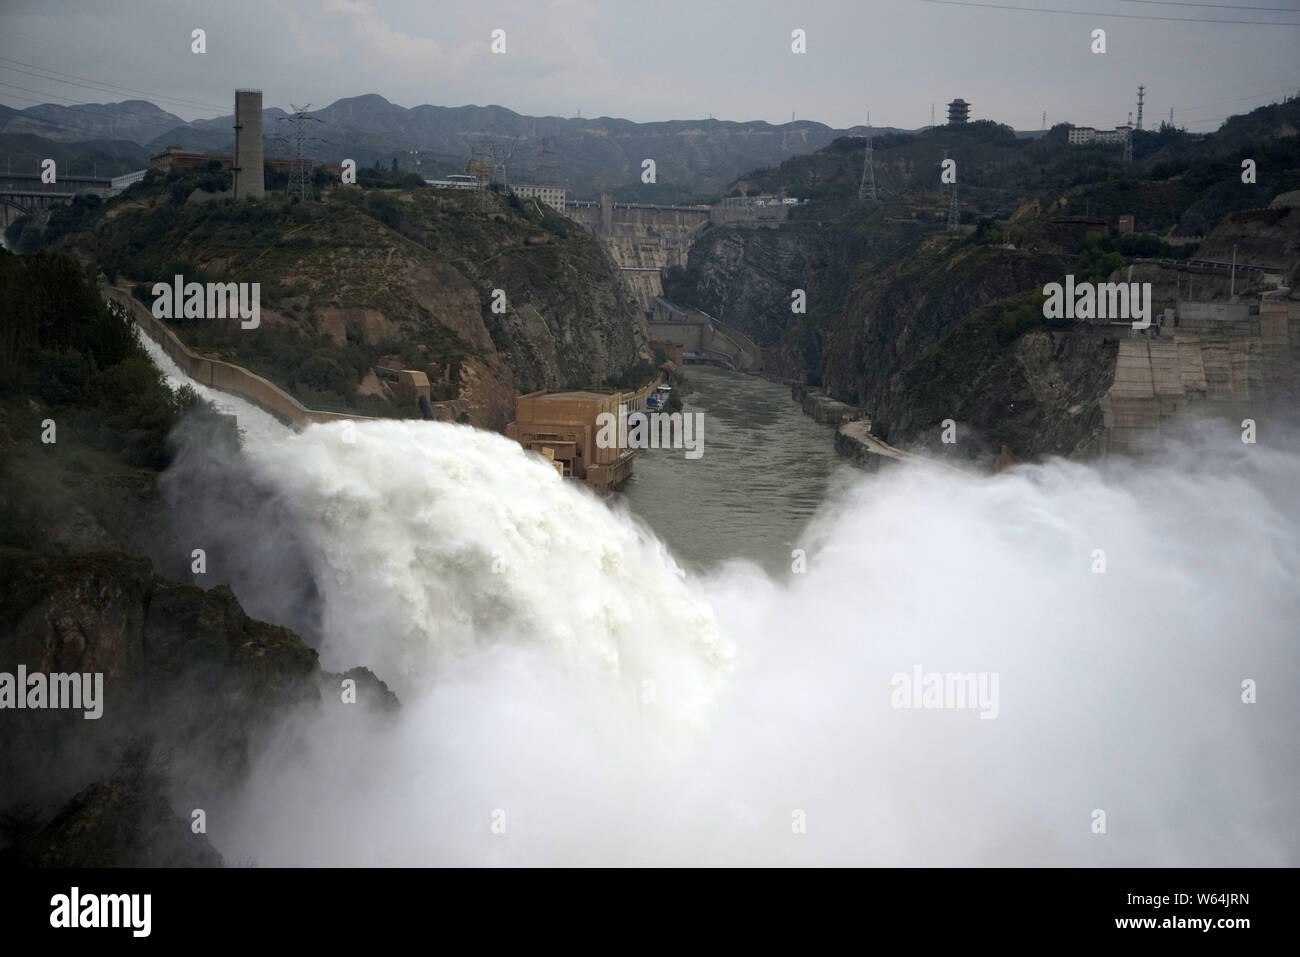 Water gushes out from the Liujiaxia Hydroelectric Station for flood control on the Yellow River in Yongjing county, Linxia Hui Autonomous Prefecture, Stock Photo